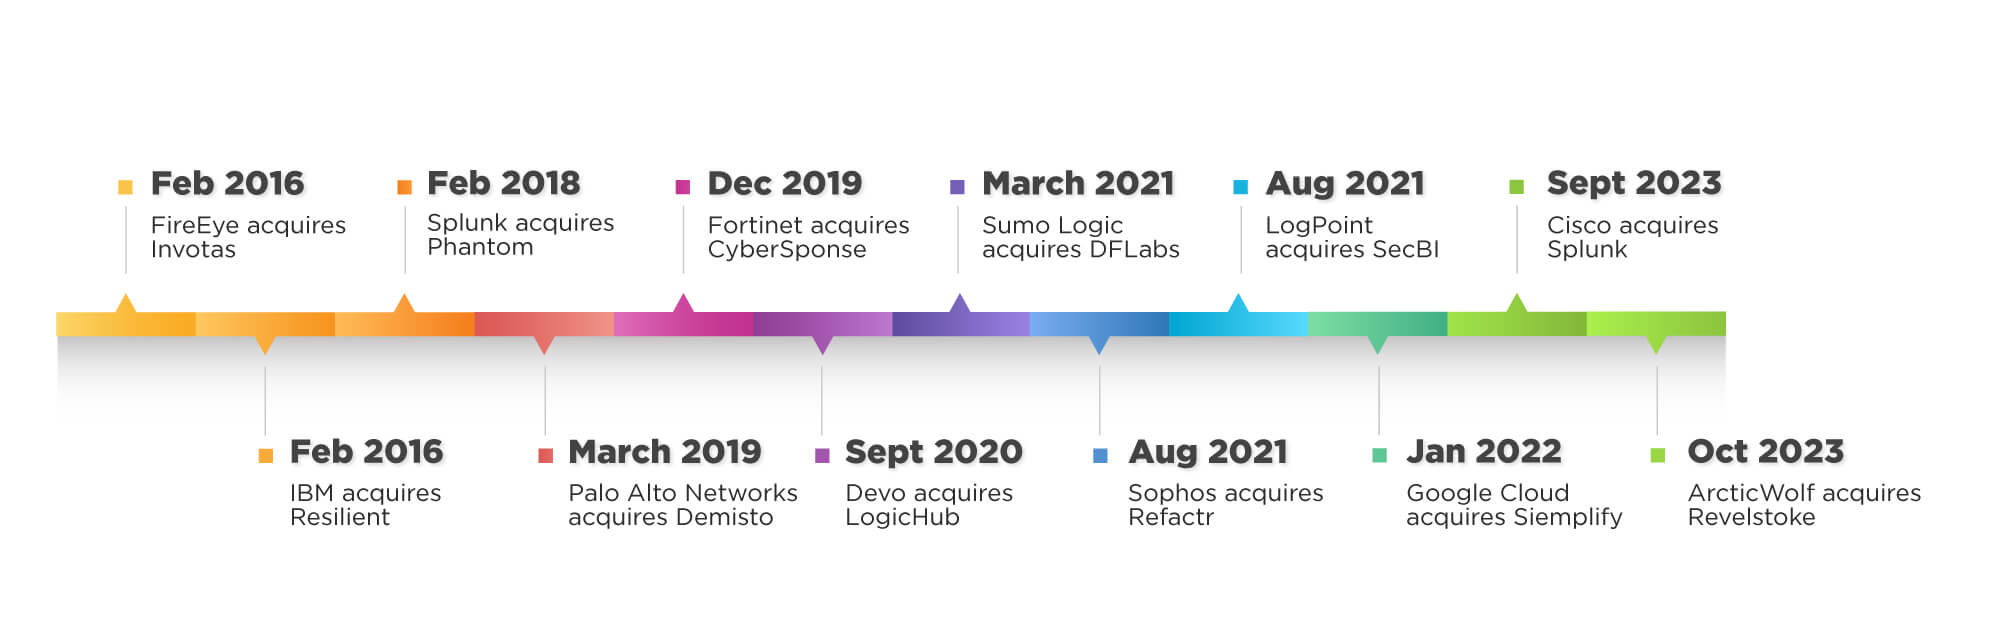 A timeline-style data visualization of SOAR acquisitions from 2016 to late 2023